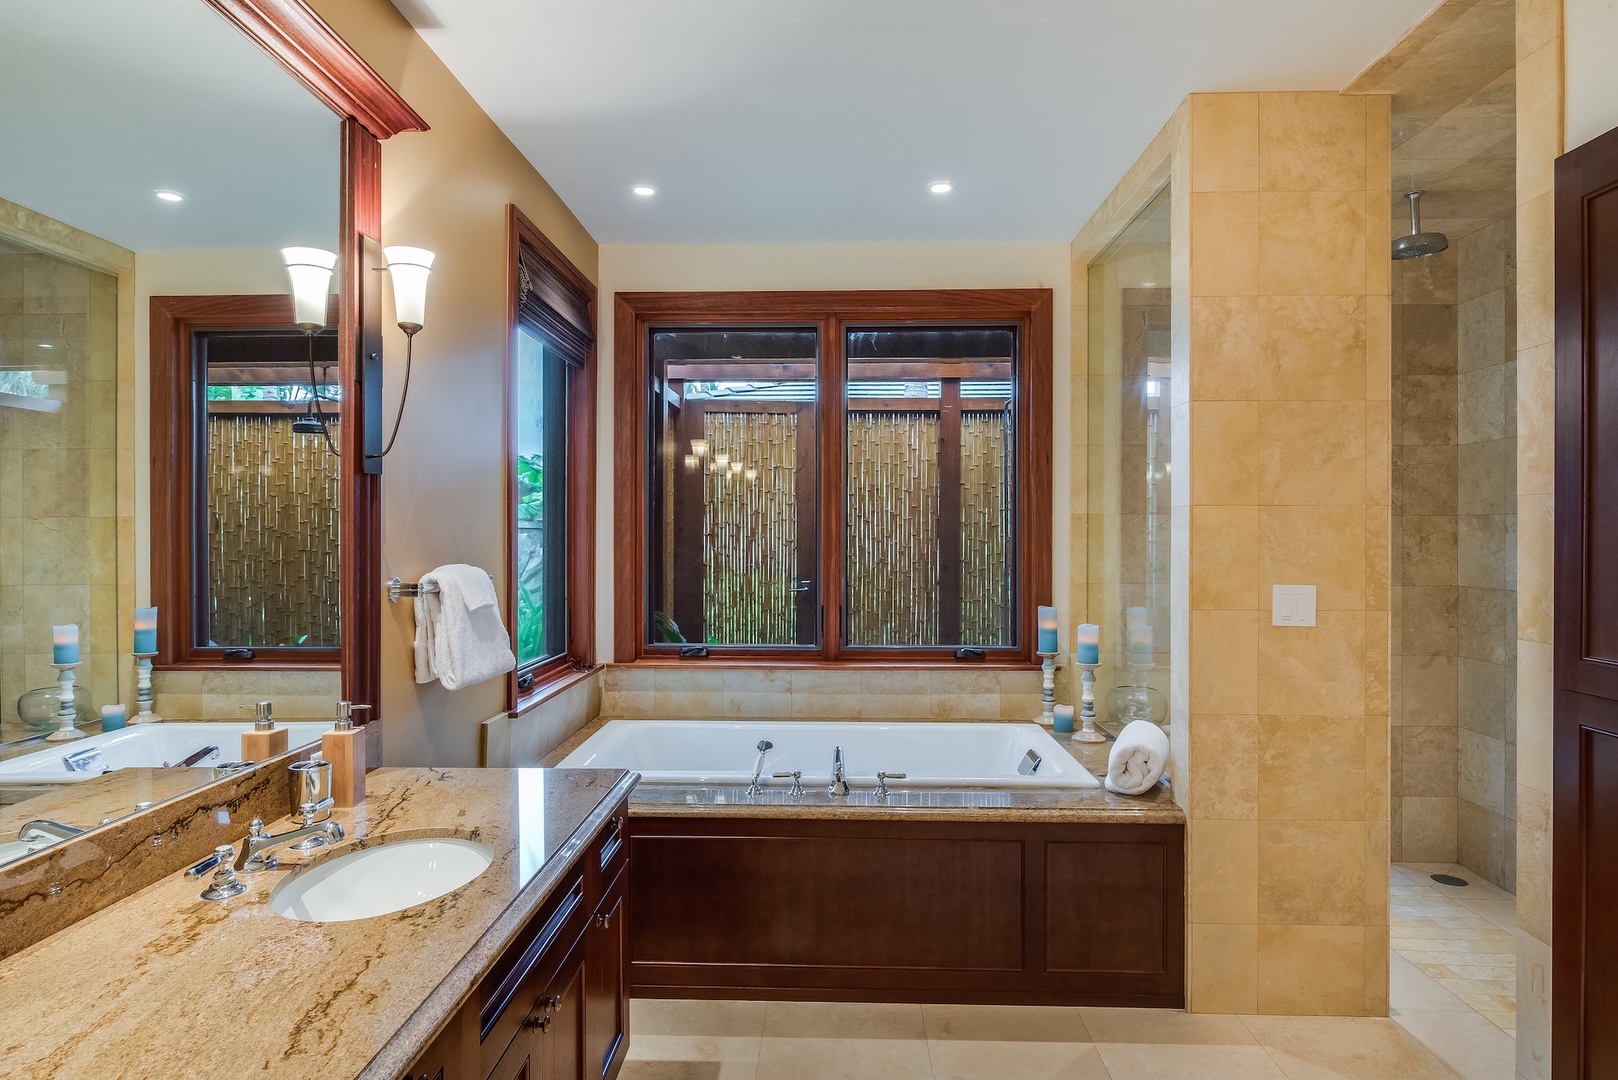 Kamuela Vacation Rentals, 3BD OneOcean (1C) at Mauna Lani Resort - Clse-Up of Downstairs Primary Bath w/ Soaking Tub and Windows to Bamboo Enclosed Outdoor Shower